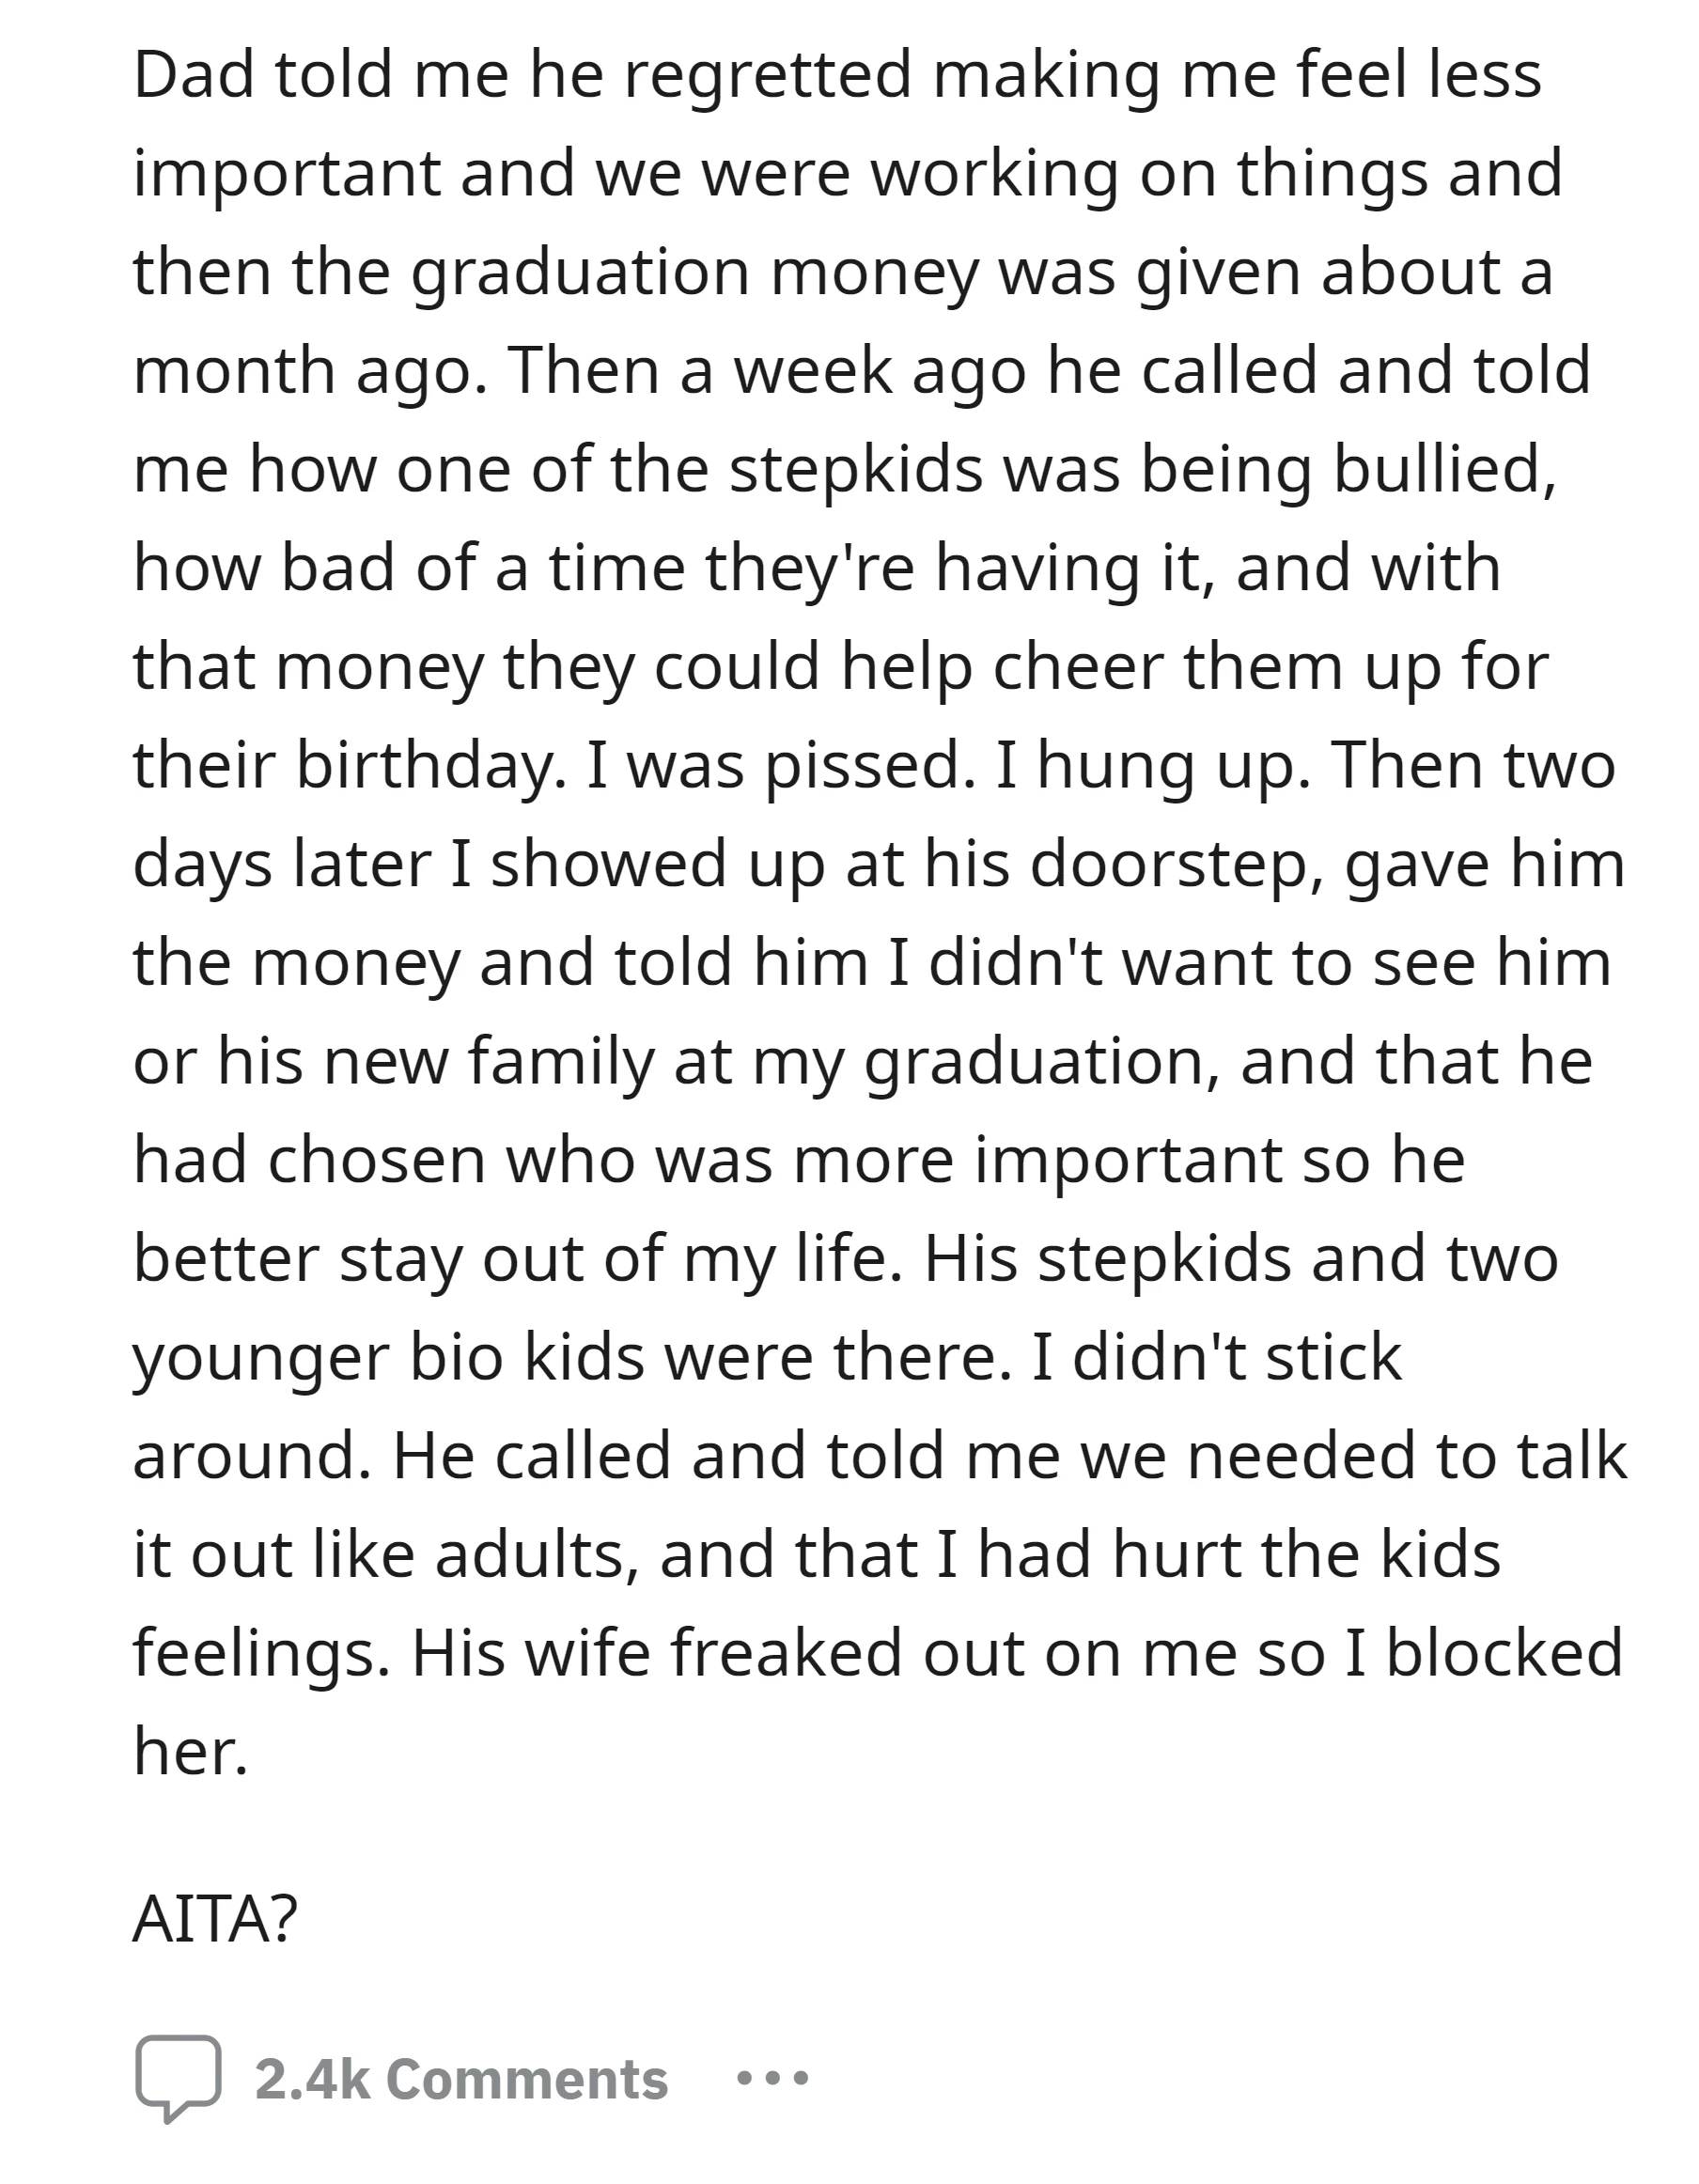 The OP ultimately decided to cut ties and exclude the dad and his new family from the graduation celebration